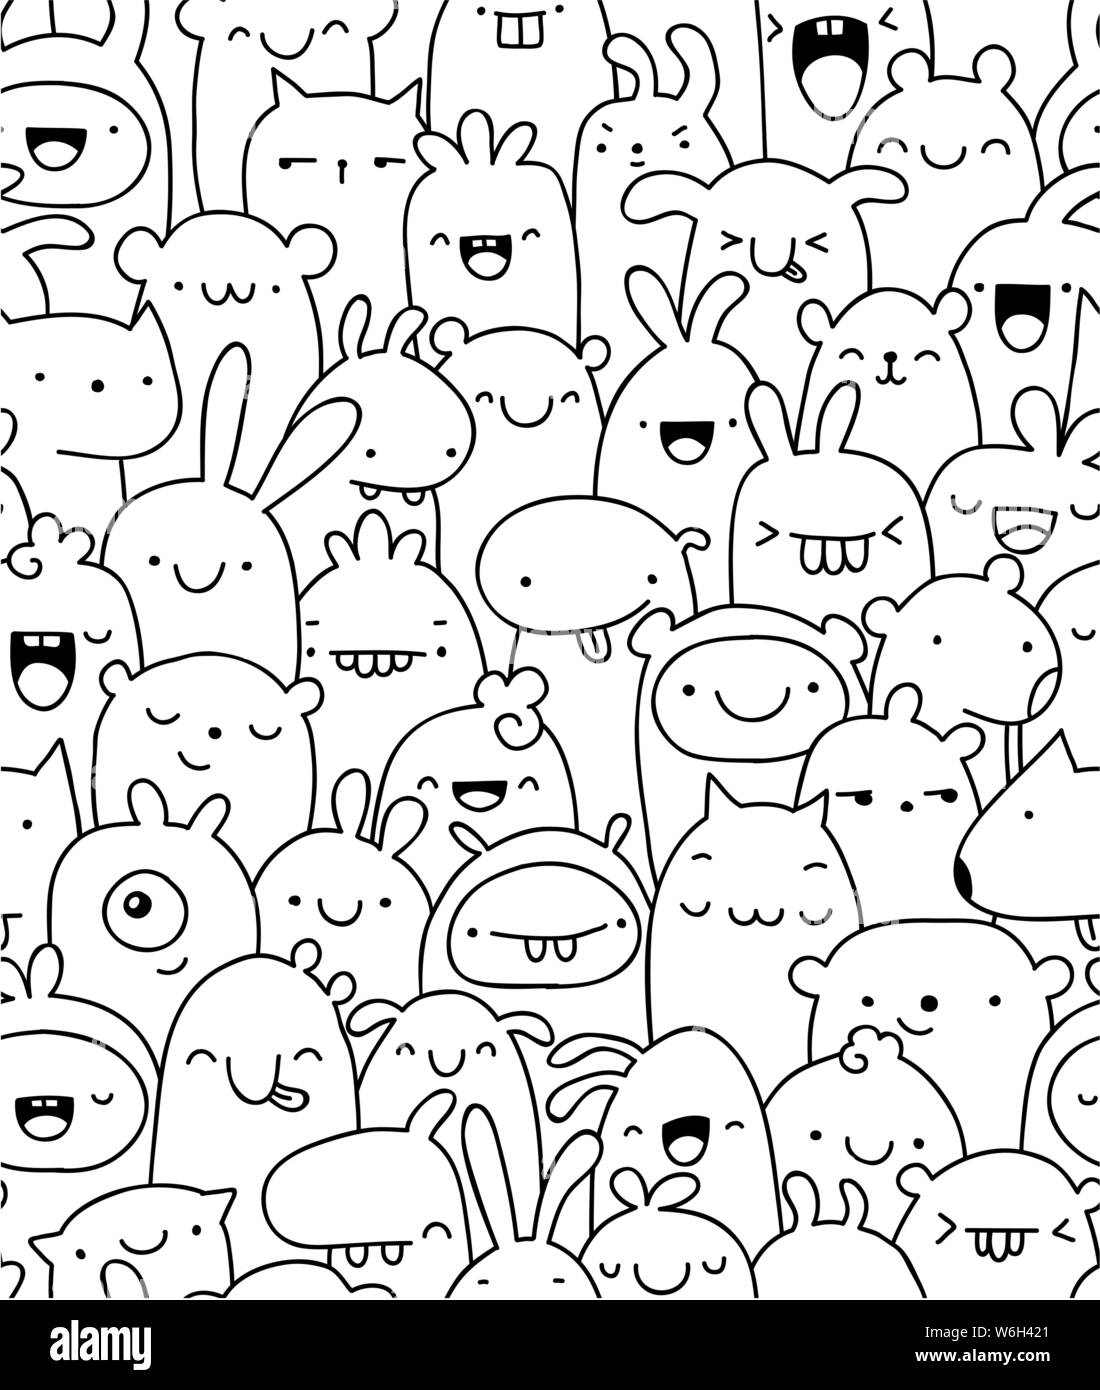 Cute and fun pattern with various imaginary characters Stock Vector